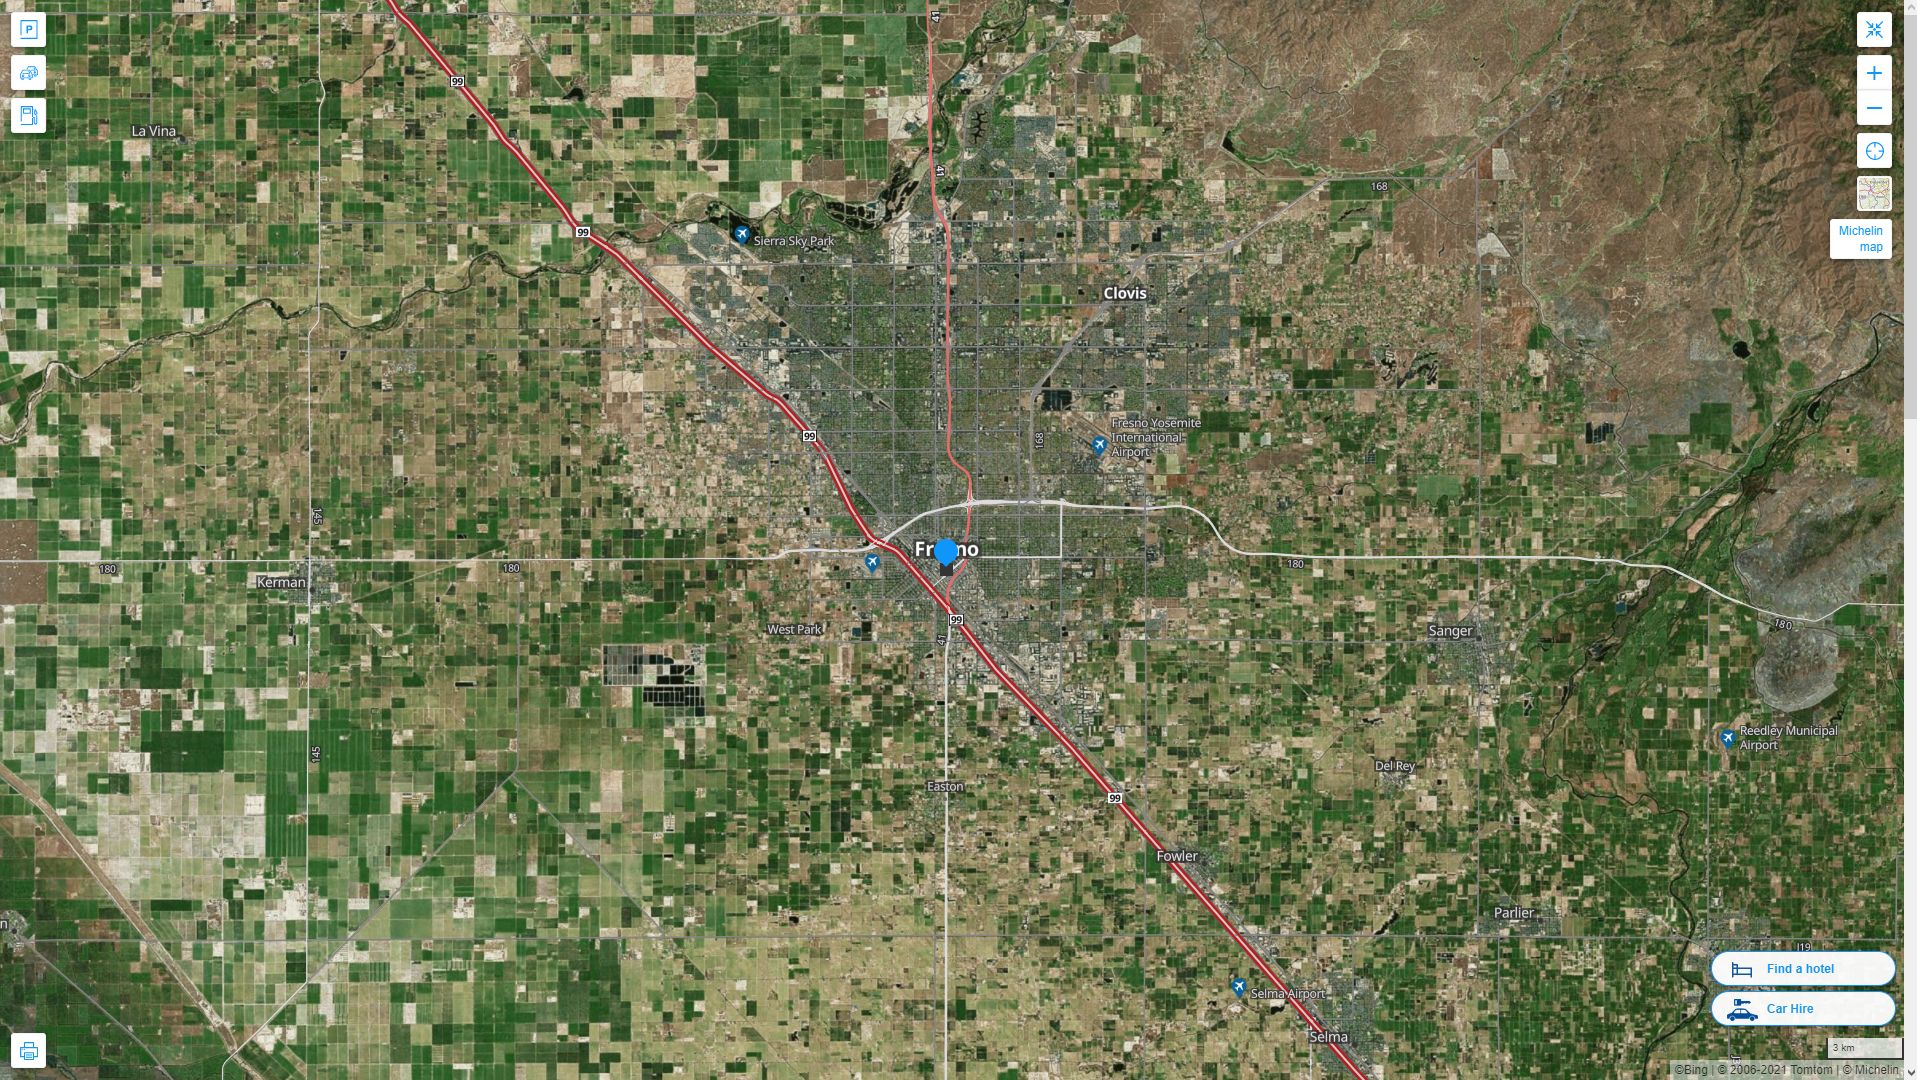 Fresno California Highway and Road Map with Satellite View